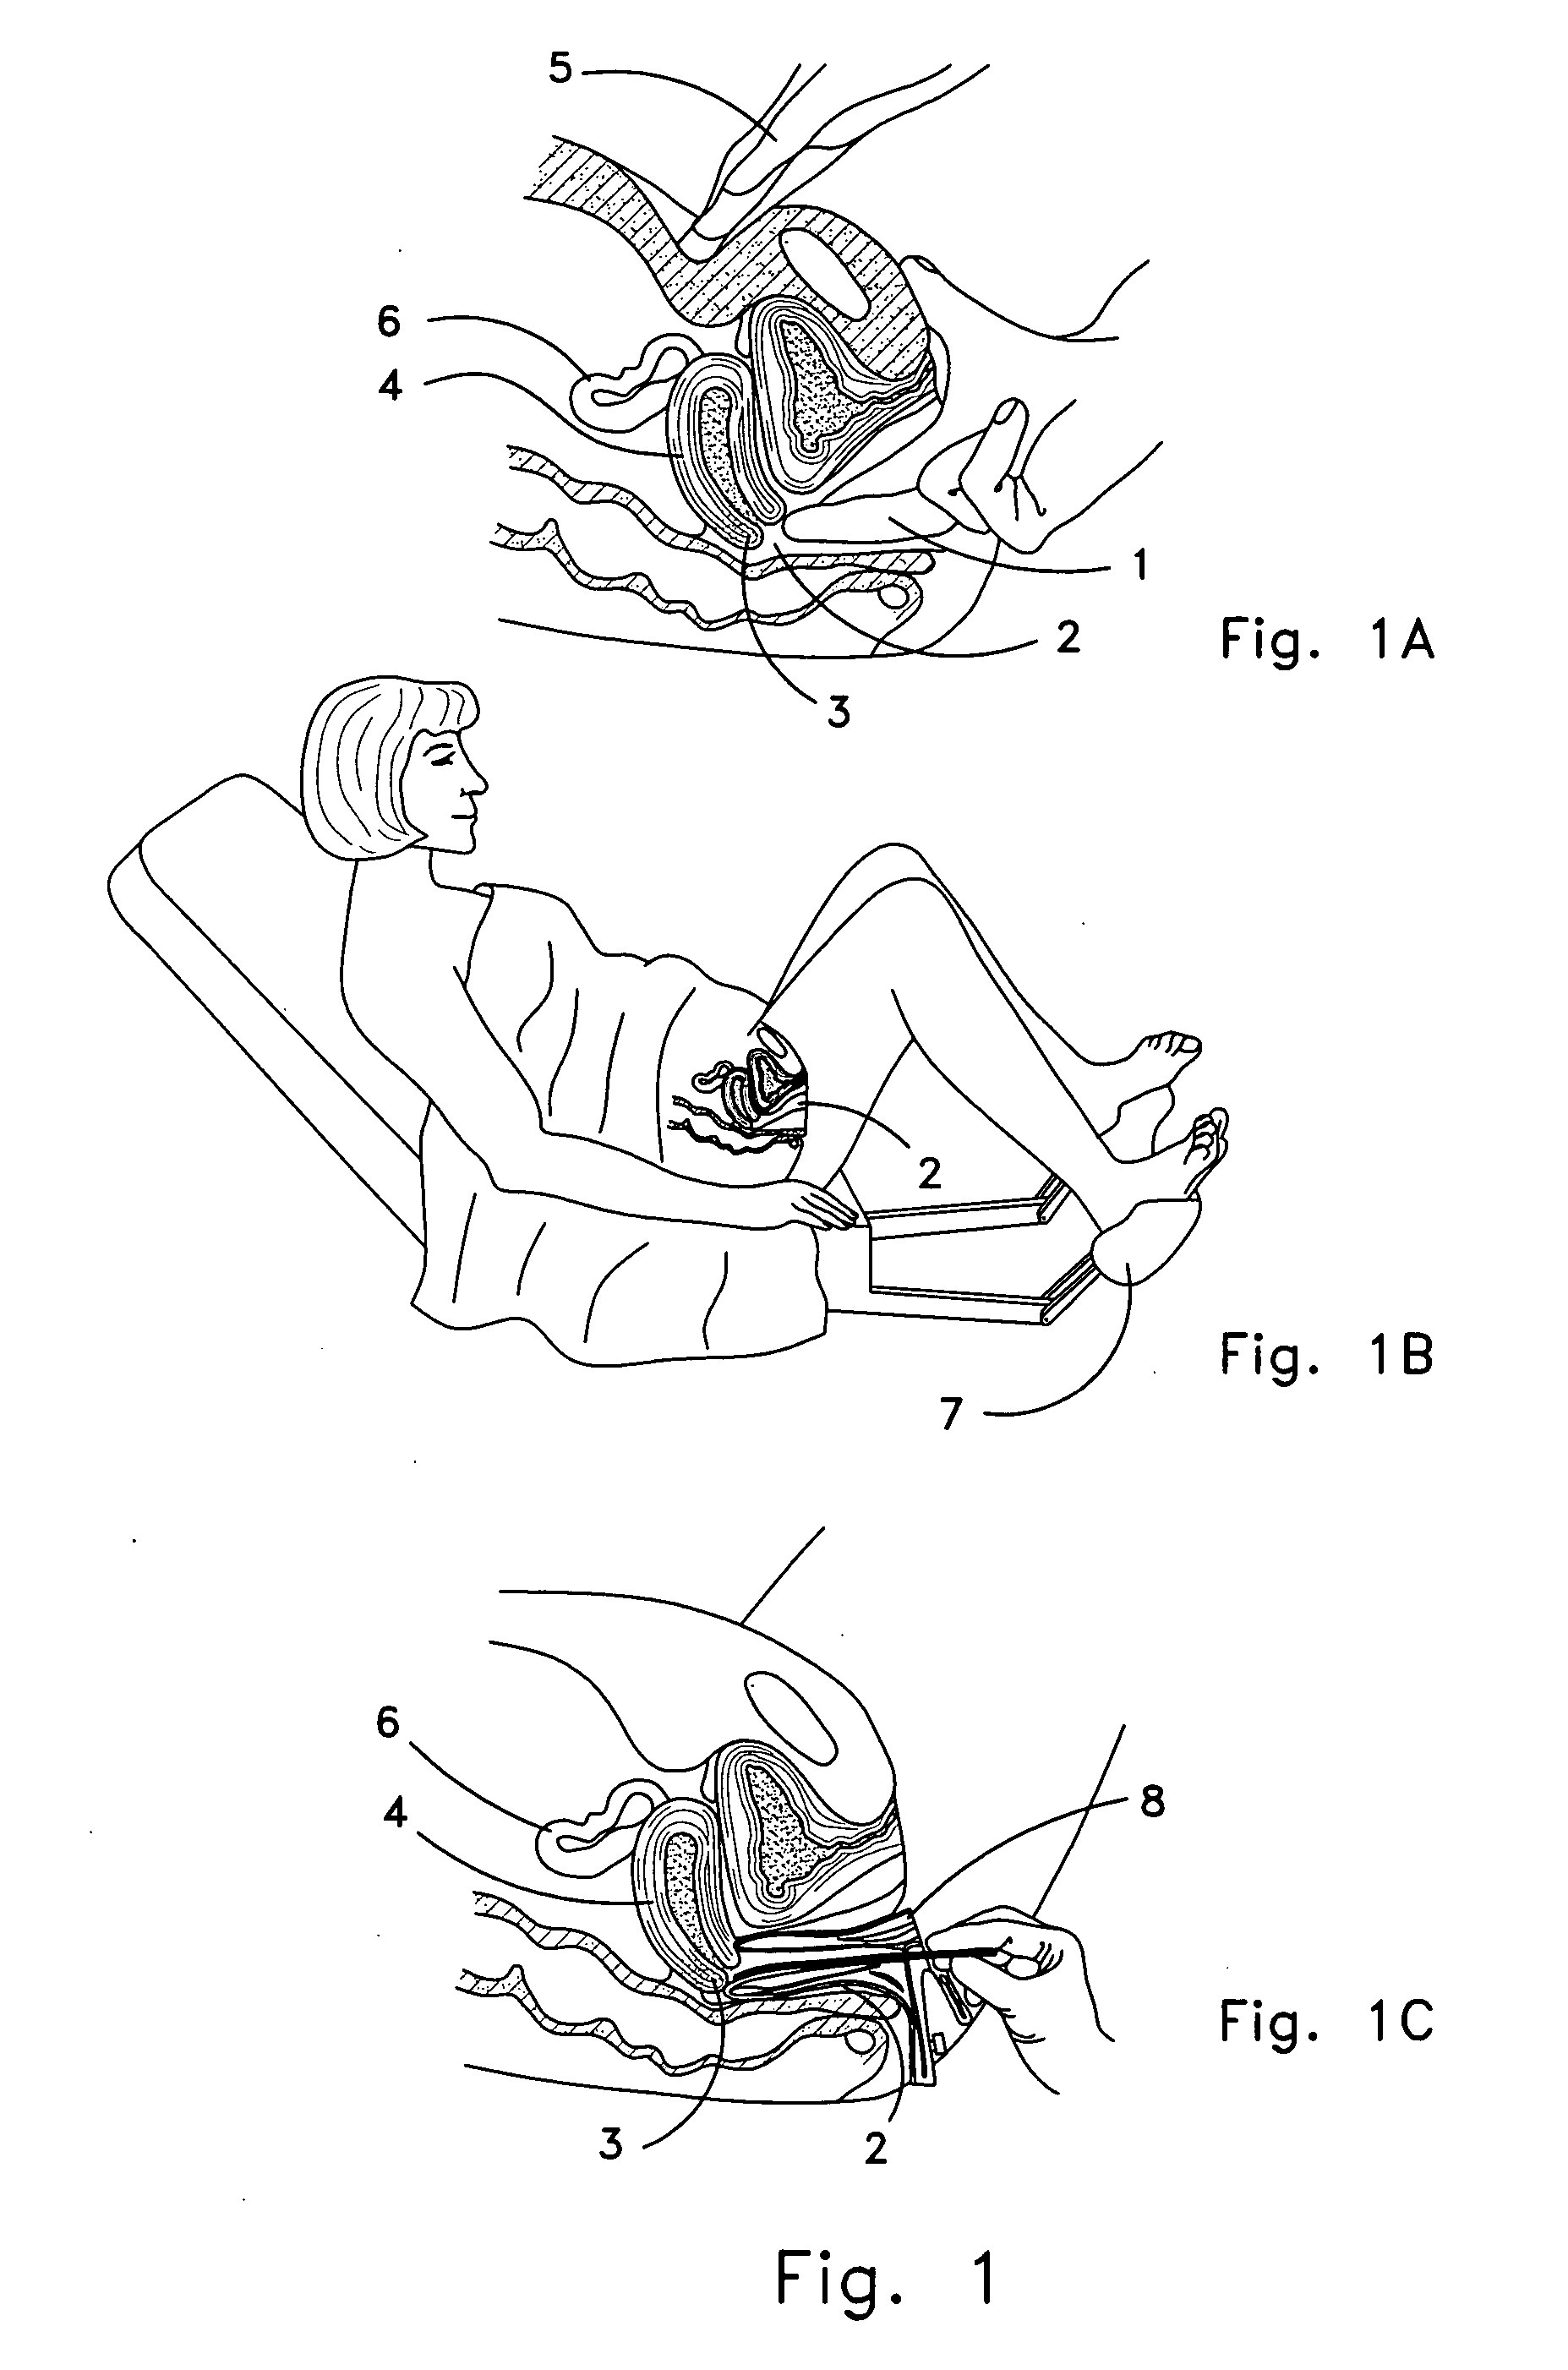 Apparatus and method of personal screening for cervical cancer conditions in vivo